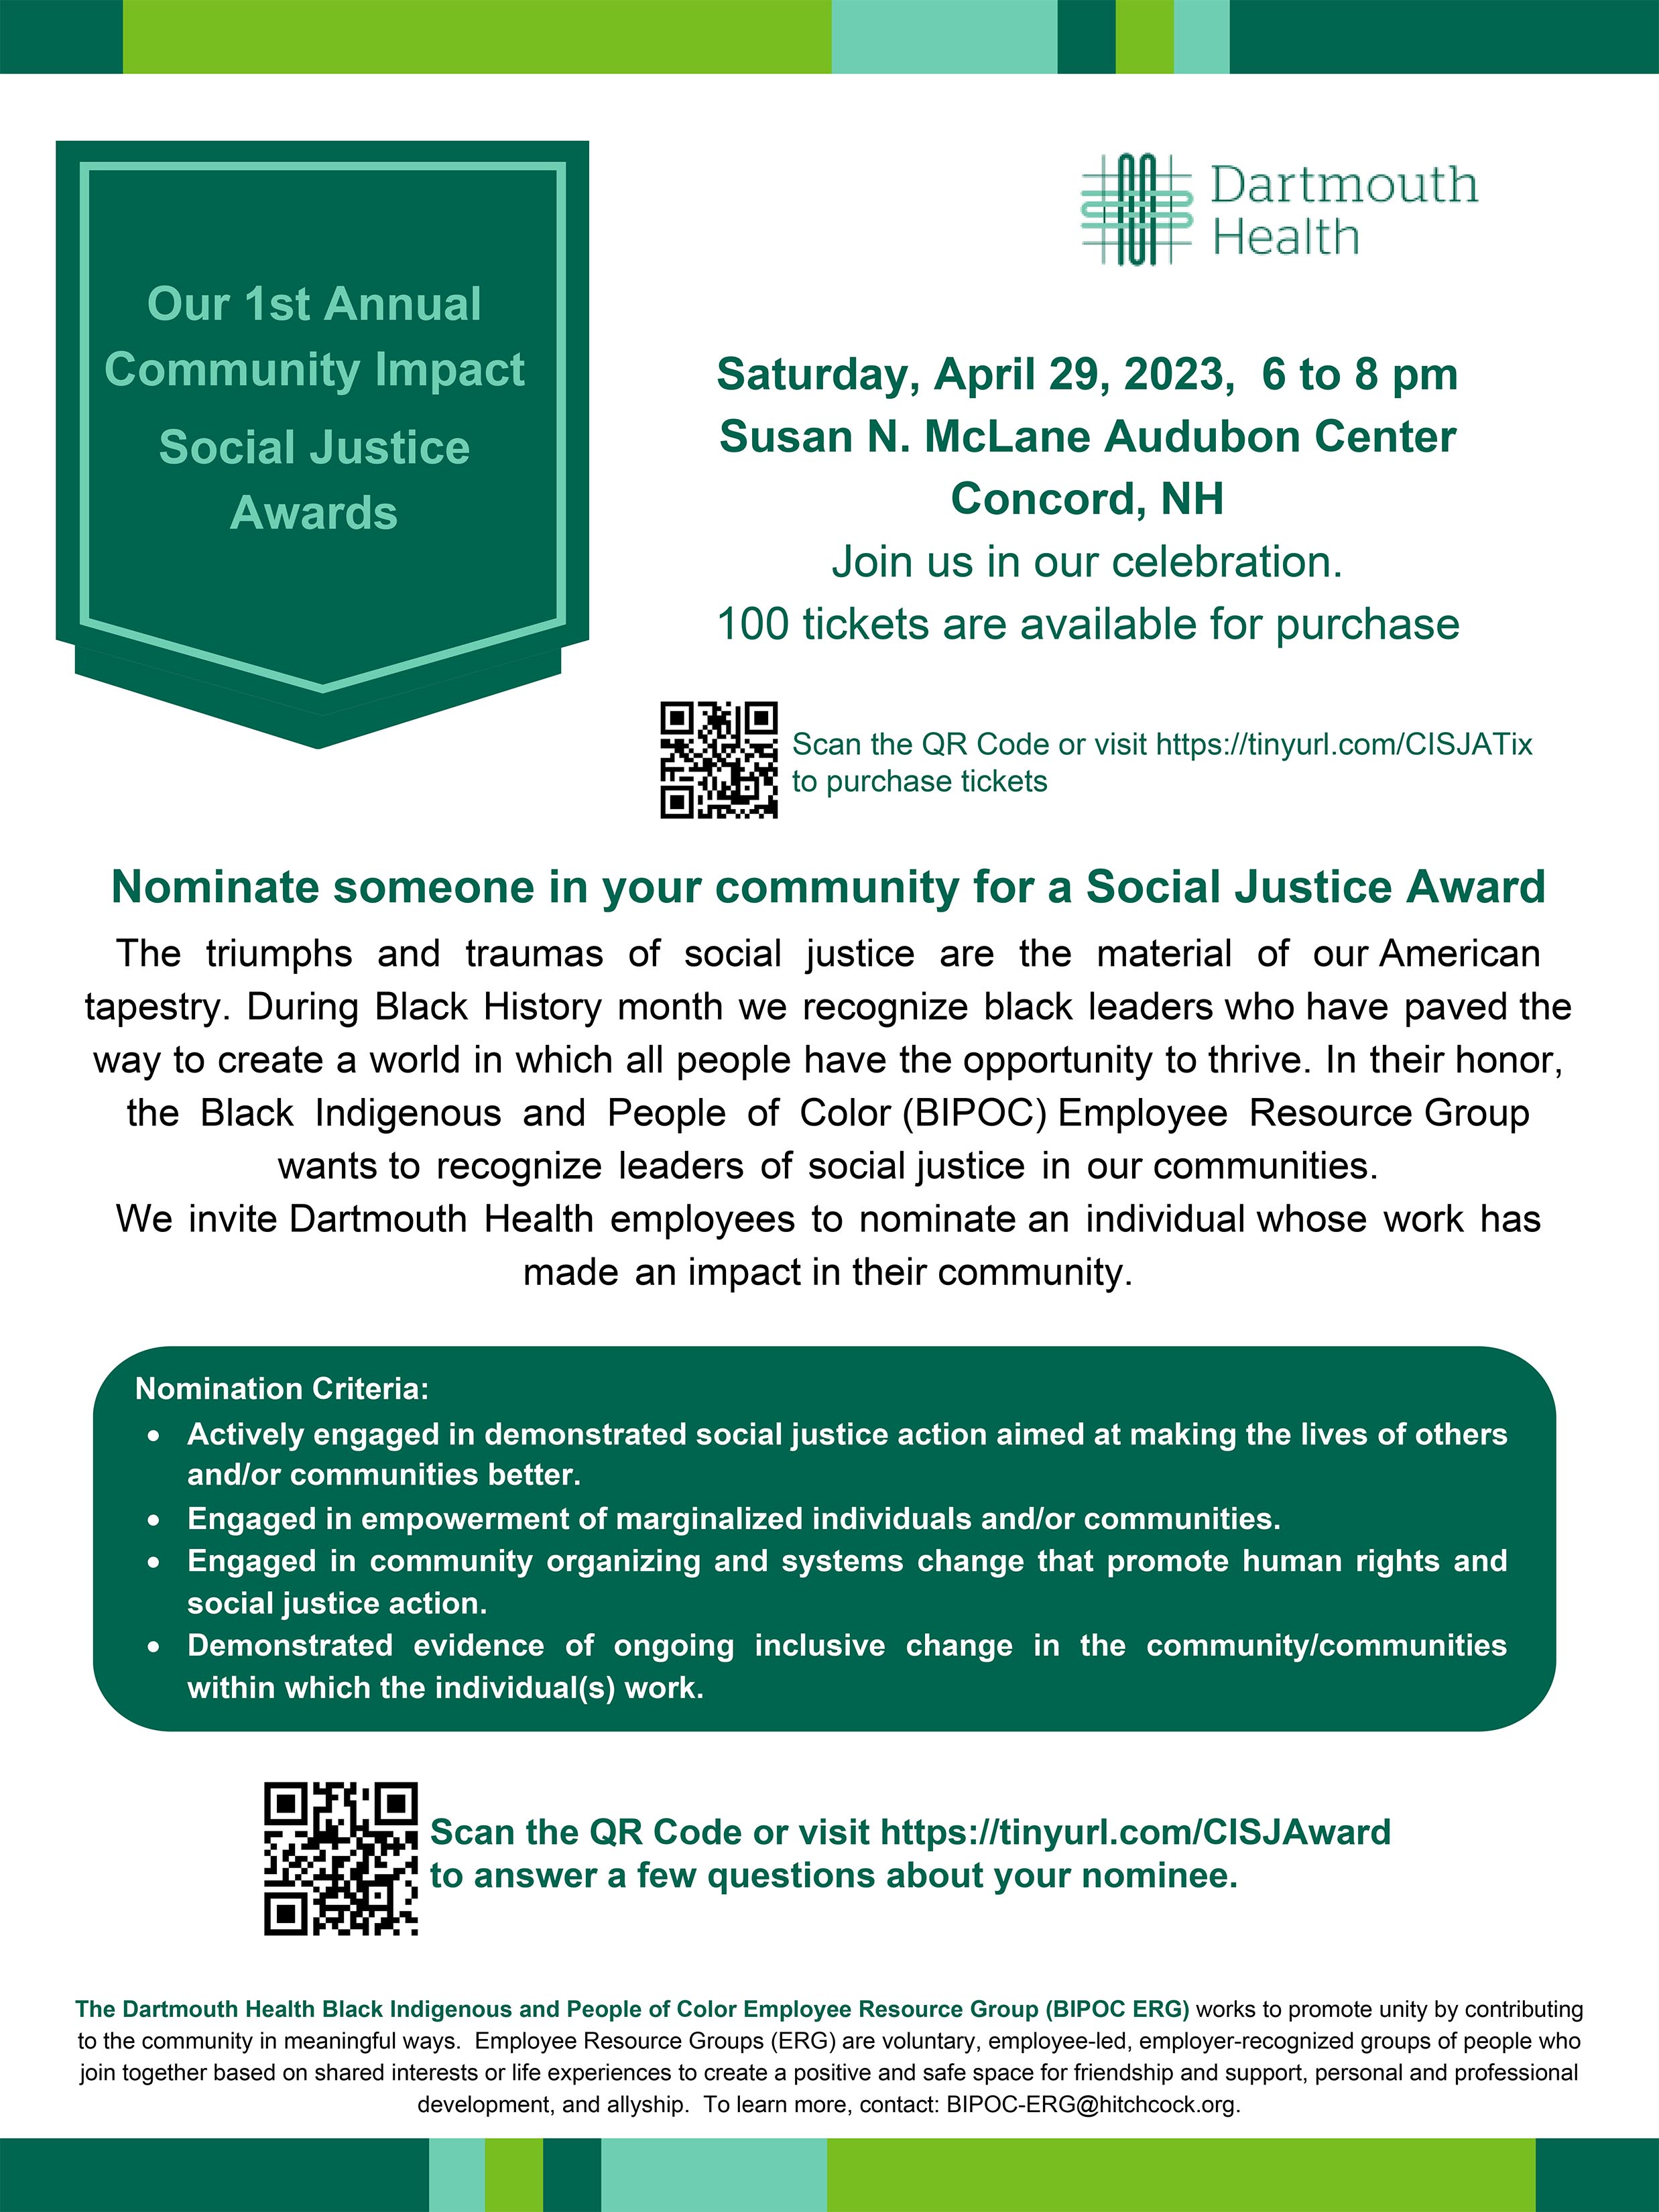 Dartmouth Health Black, Indigenous, and People of Color Employee Resource Group's 1st Annual Community Impact Social Justice Awards